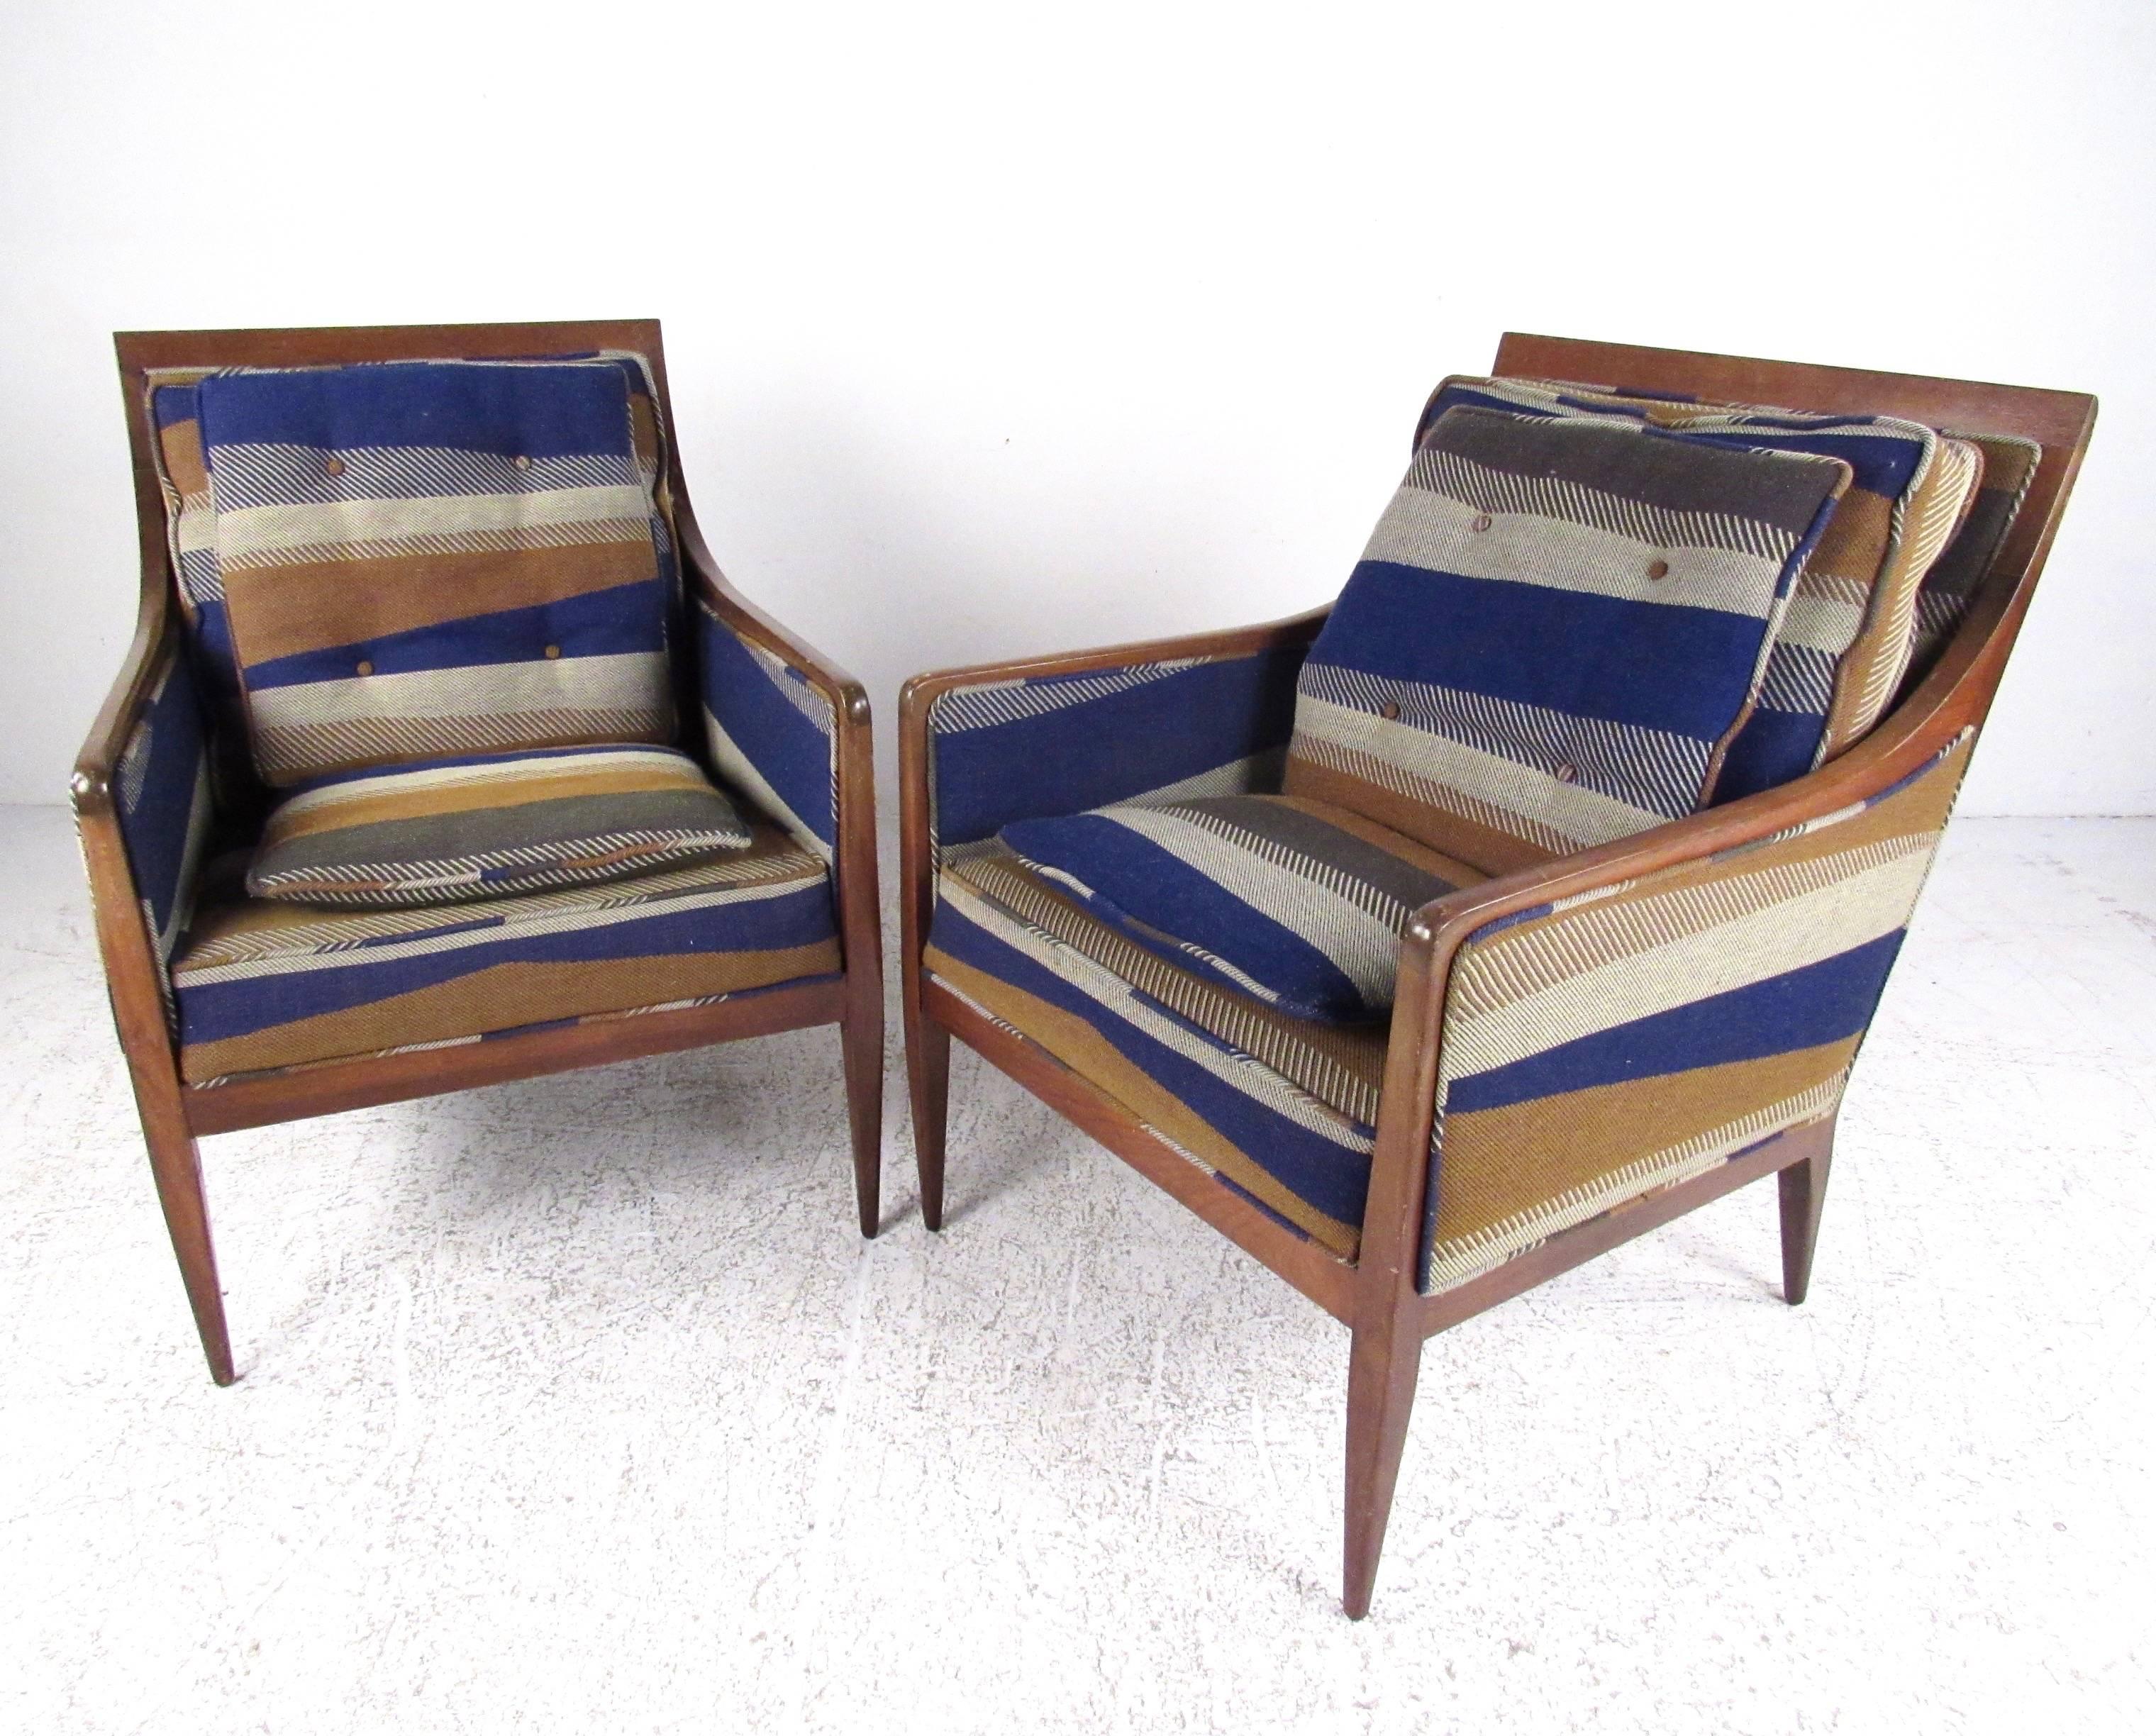 This stylish pair of midcentury lounge chairs by Paul McCobb for Calvin Group feature sturdy vintage walnut frames and unique original upholstery. The stylish shape of this designer pair of chairs makes them a comfortable and striking addition to